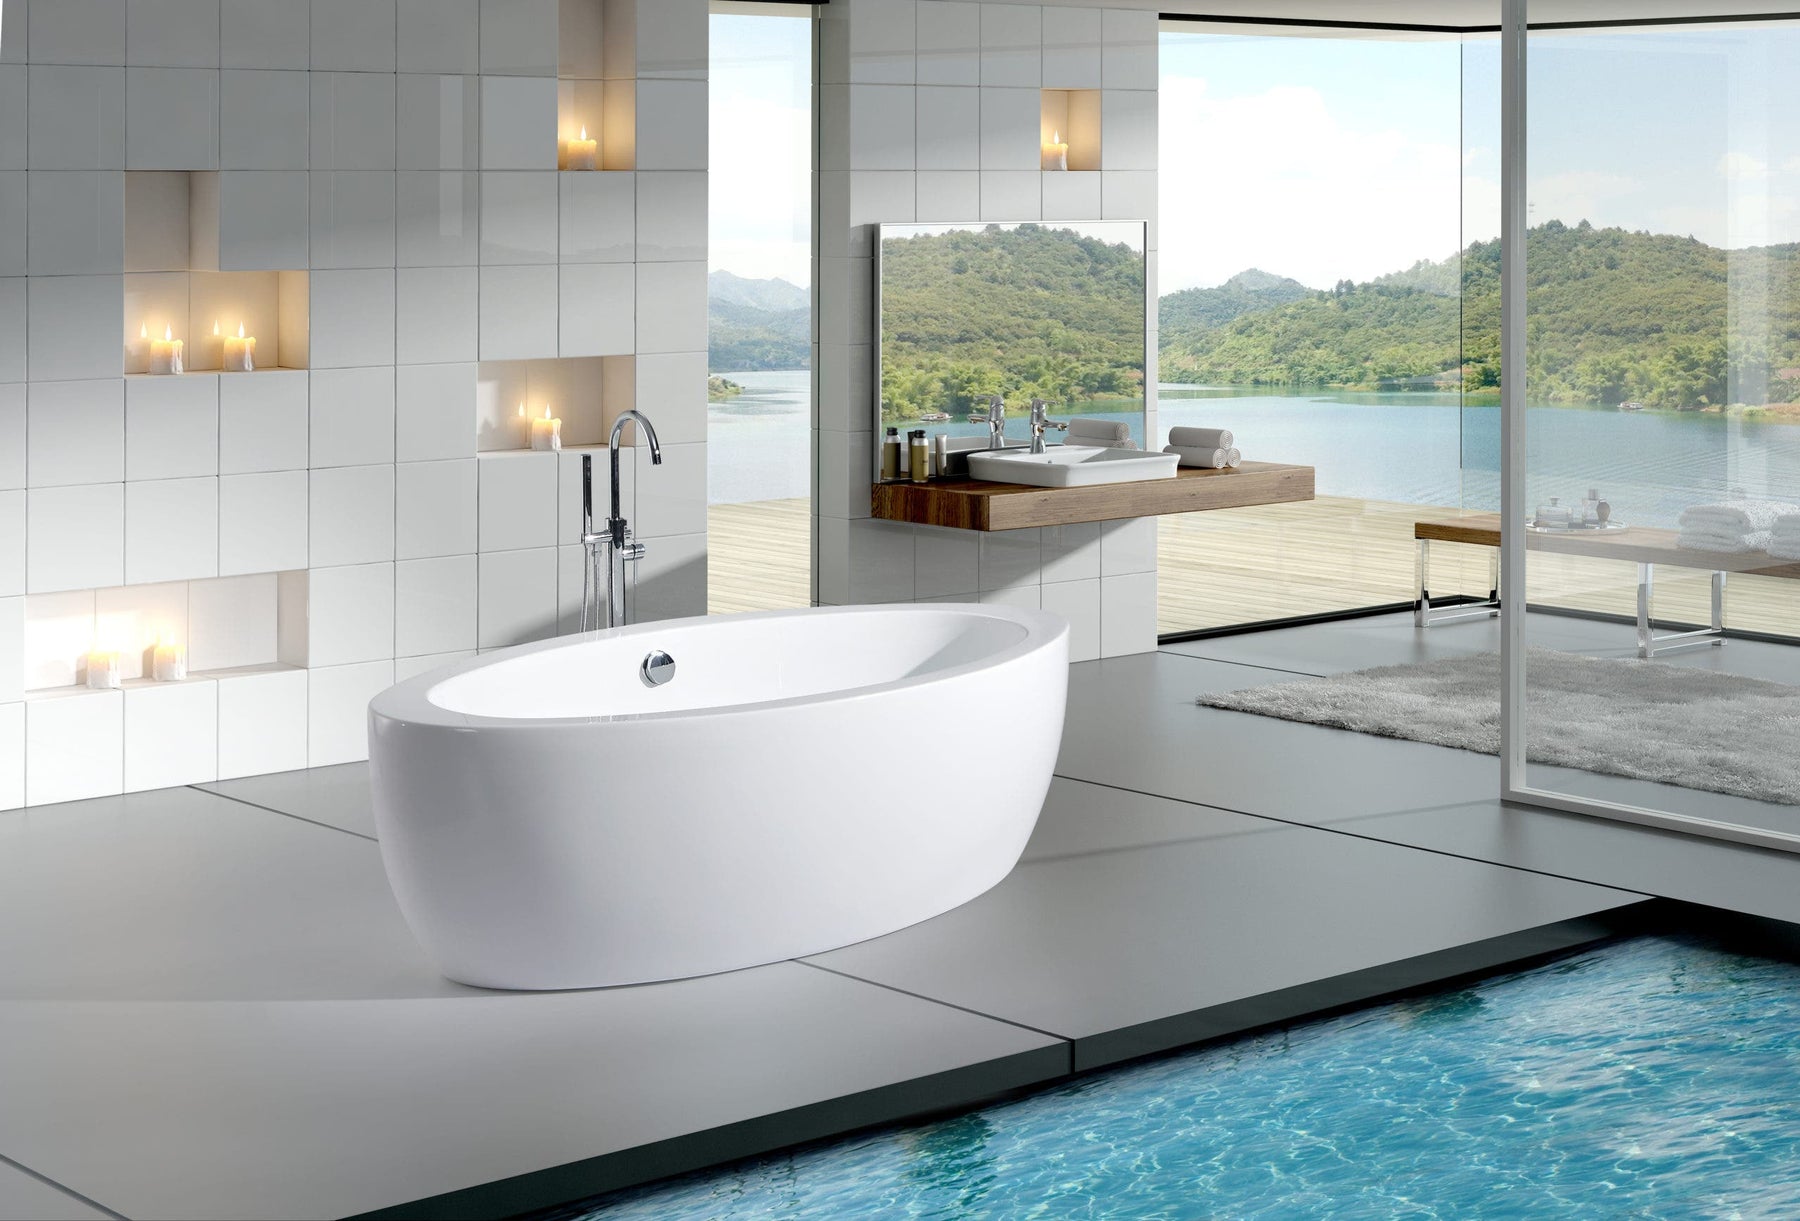 Turning your bathroom into a the ultimate spa experience.